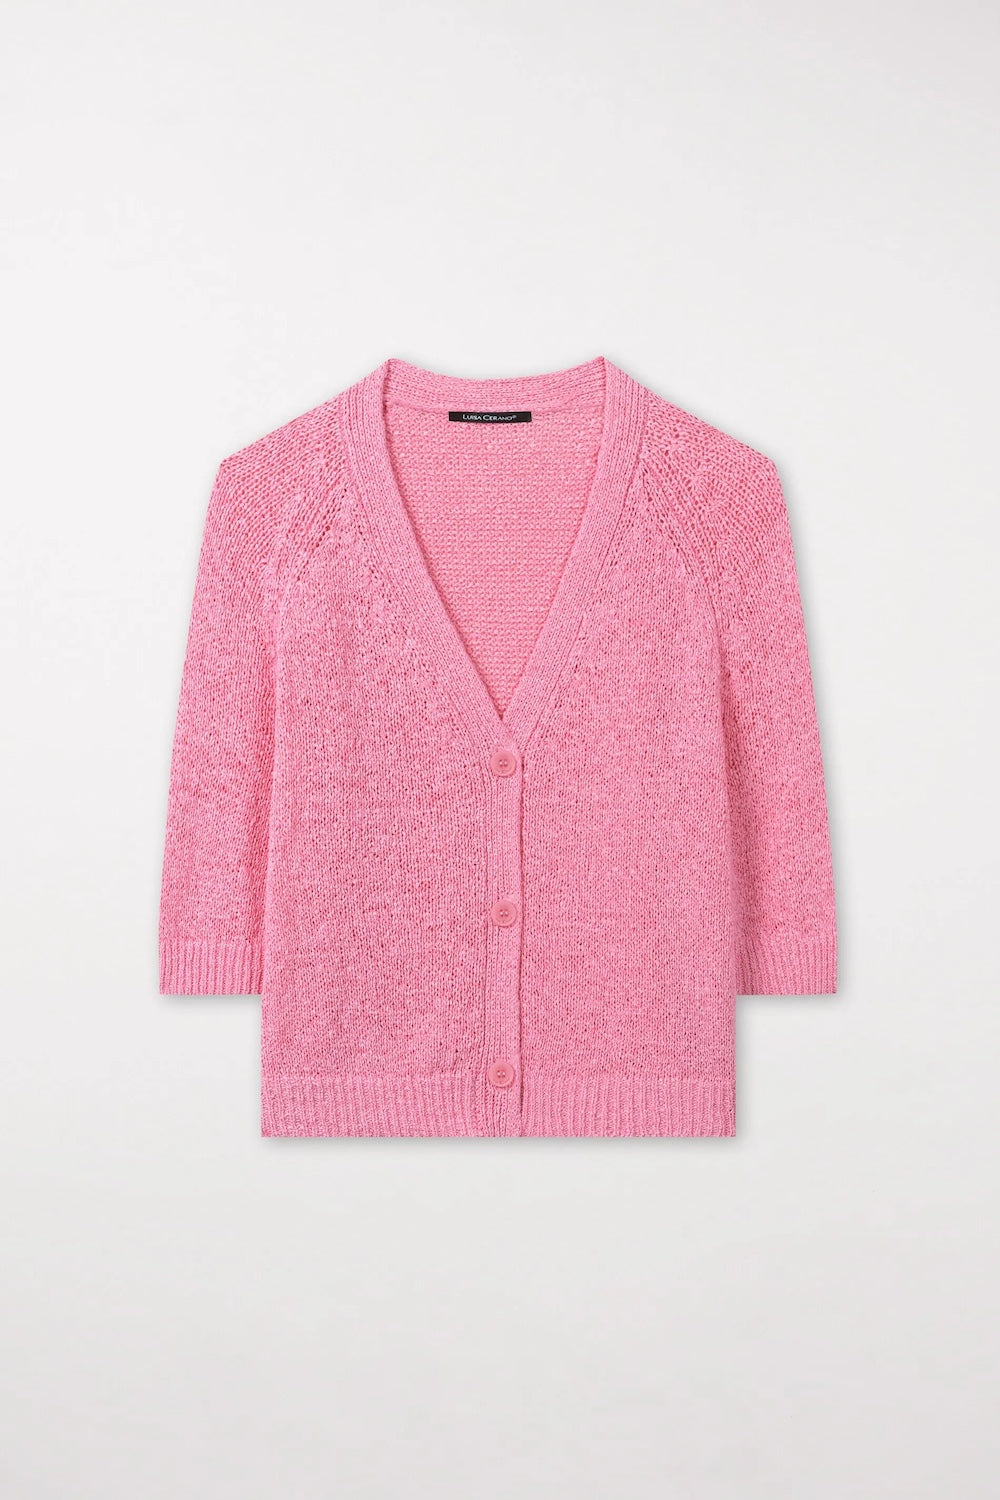 Candy Pink Short Sleeved Cardigan